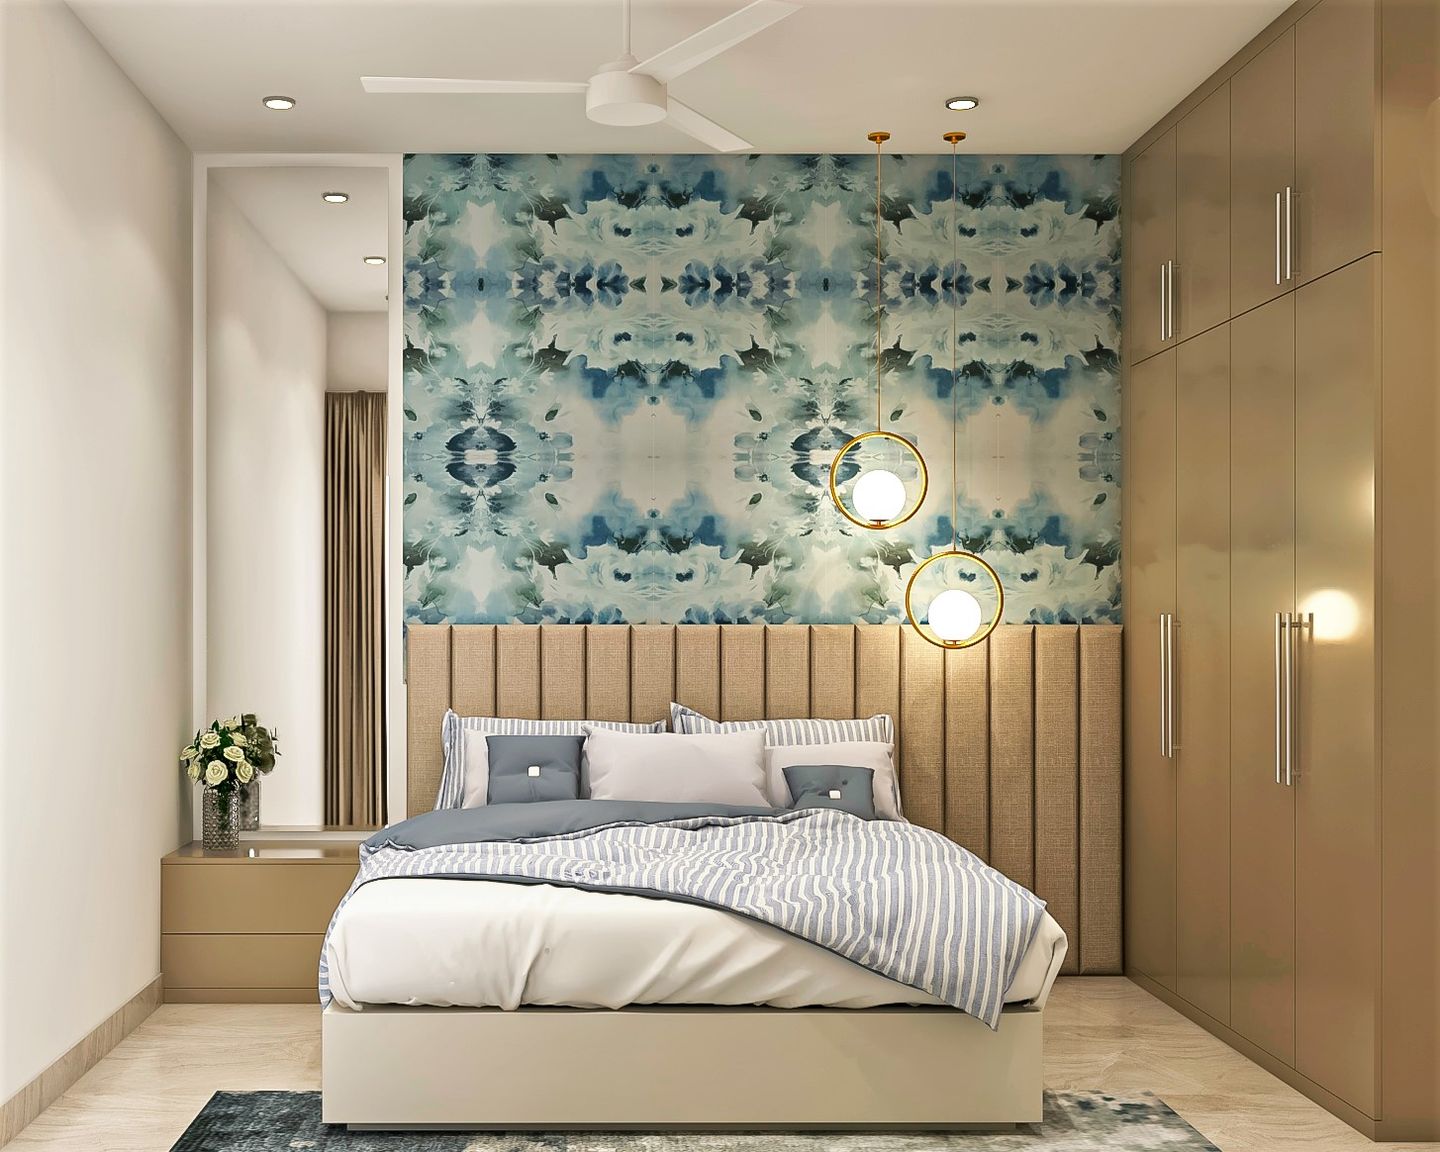 Brown and Blue Bedroom Designs - Livspace